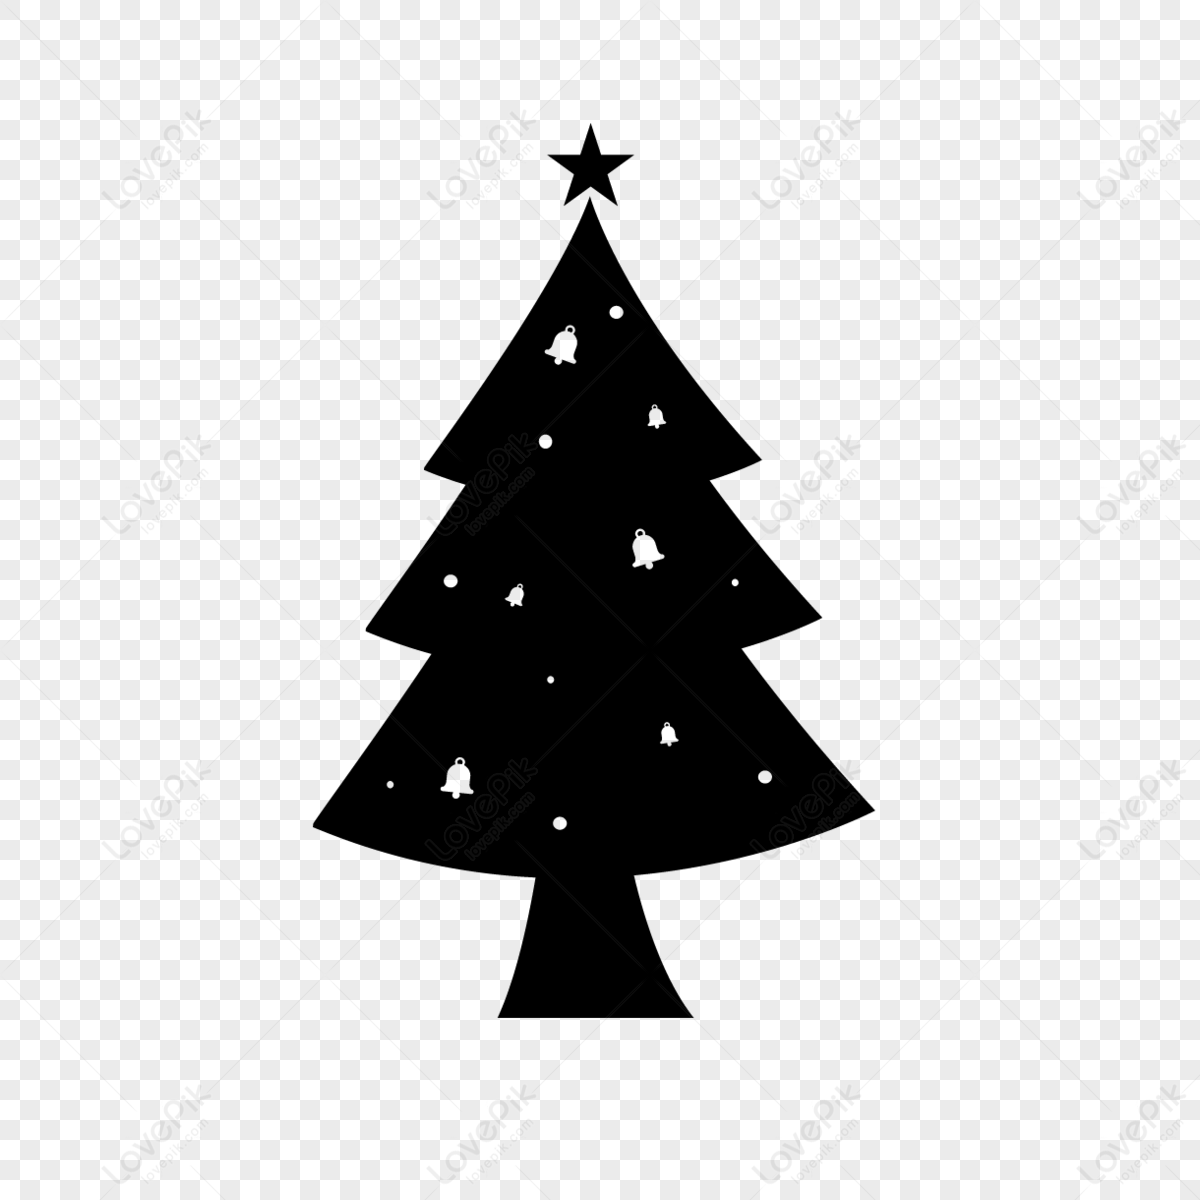 Christmas tree silhouette of the bell, Bell,  pendant,  christmas tree silhouette png transparent background